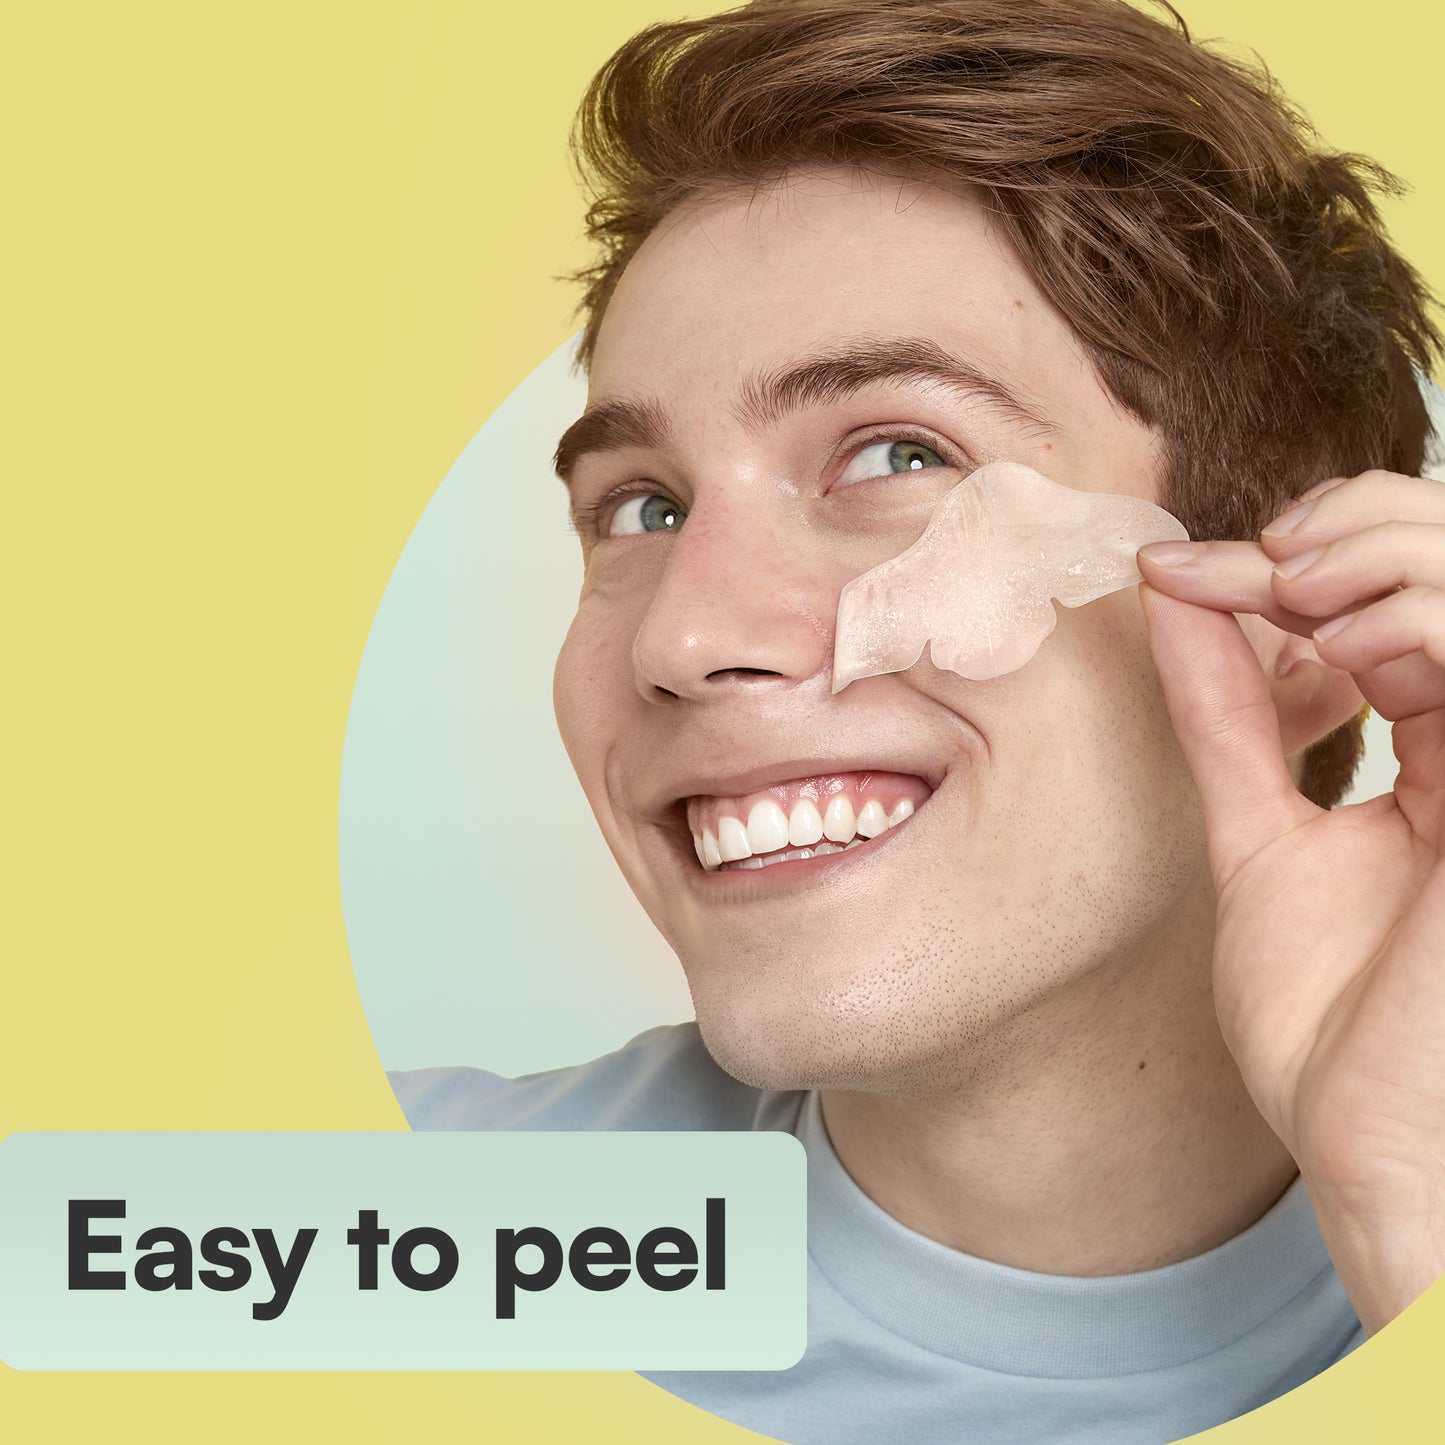 Man with a satisfied expression holding a Nose Pore Patch, Easy to Peel- nose pore patches